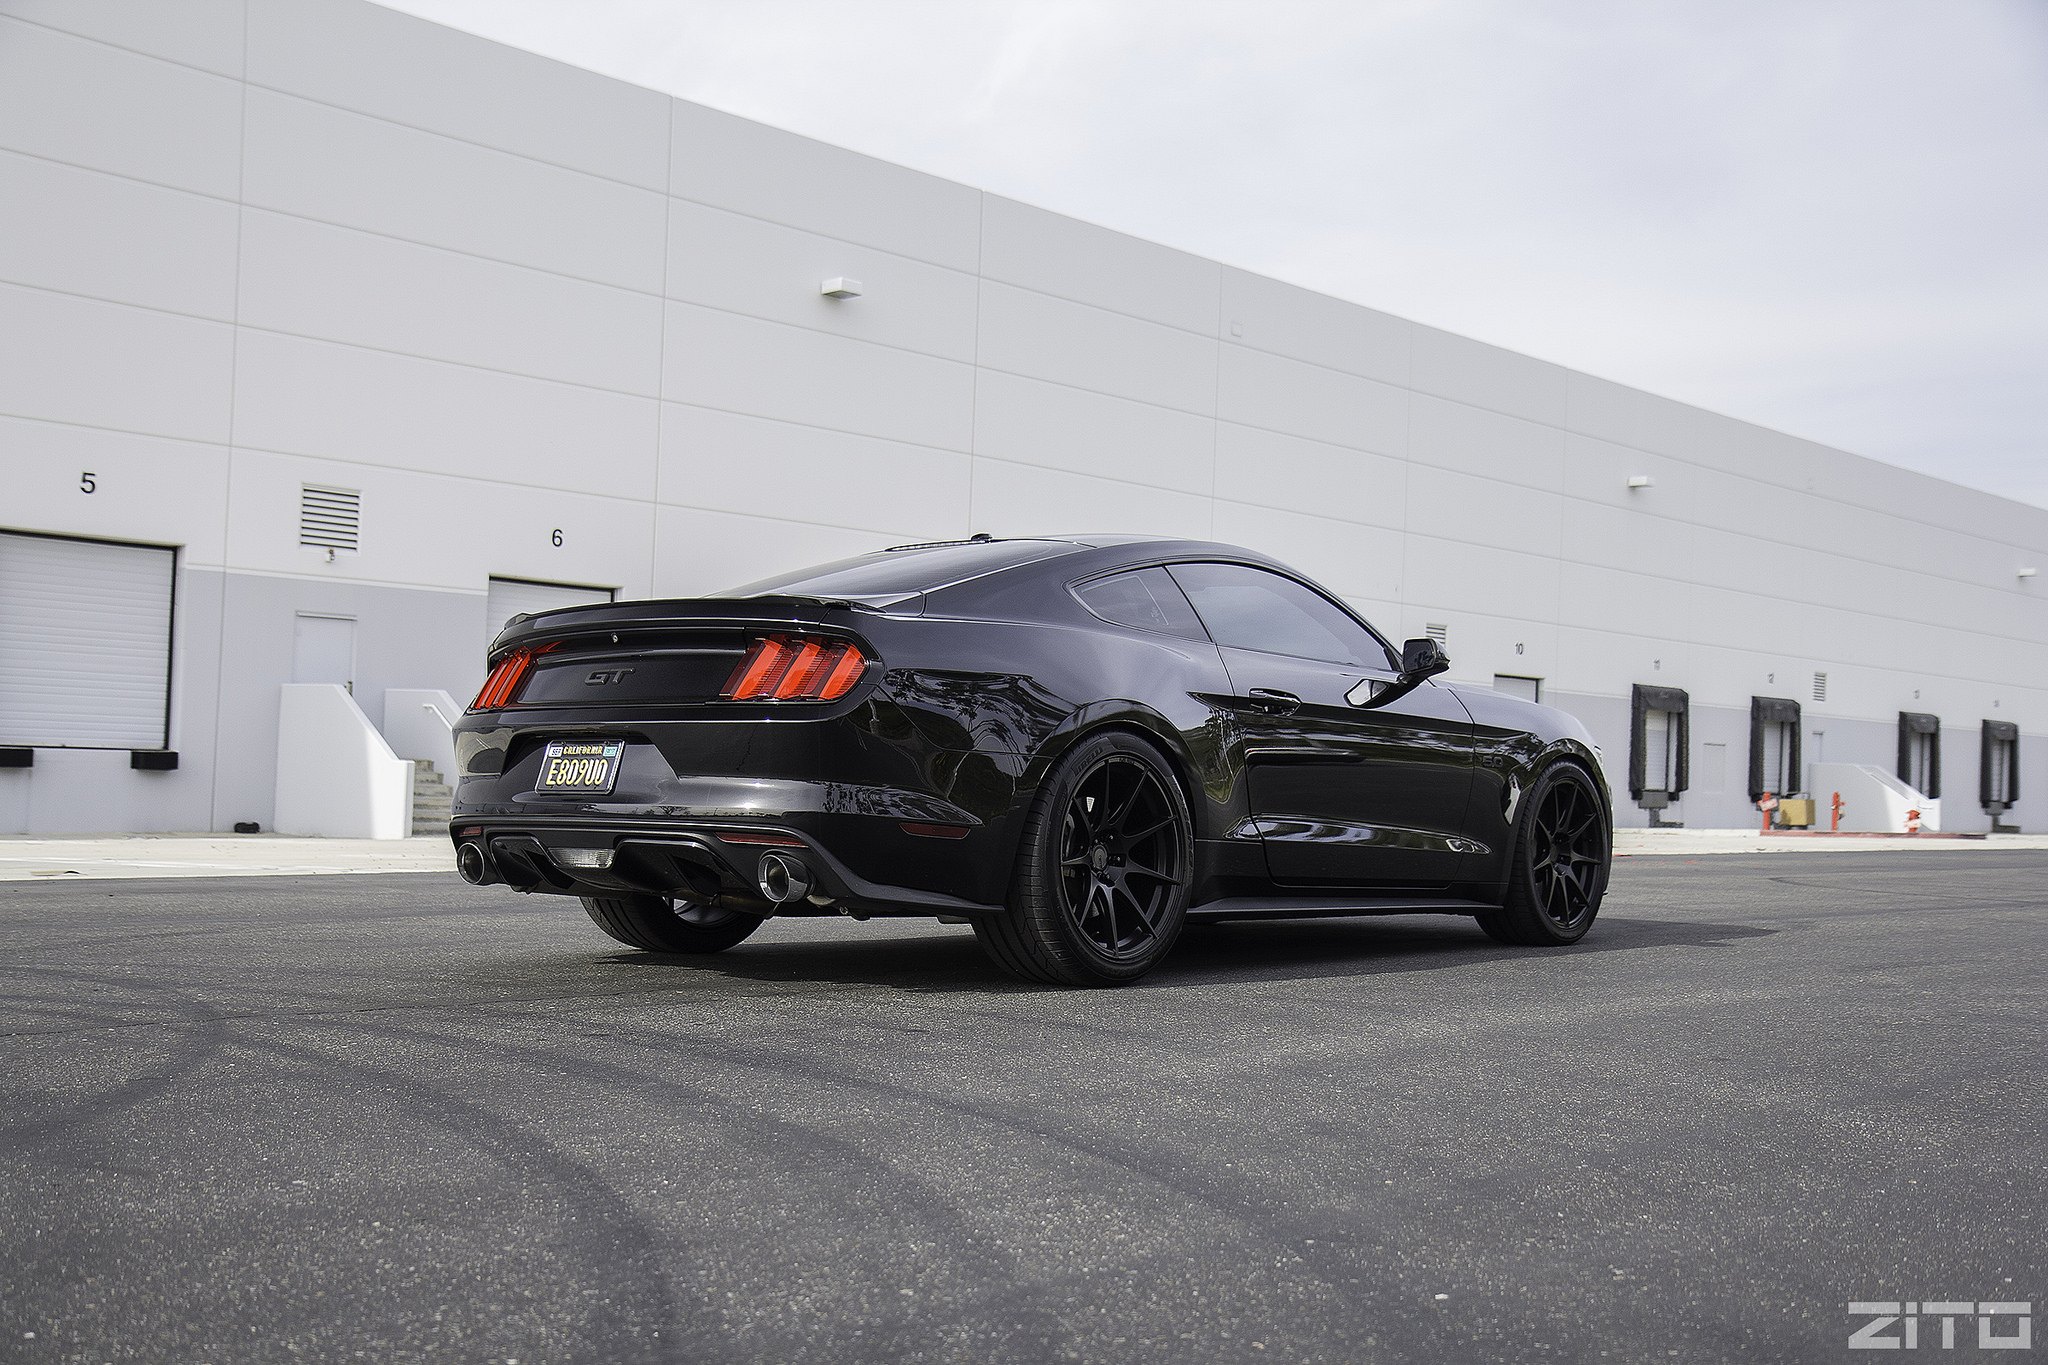 Aftermarket Rear Diffuser on Black Ford Mustang GT - Photo by Zito Wheels